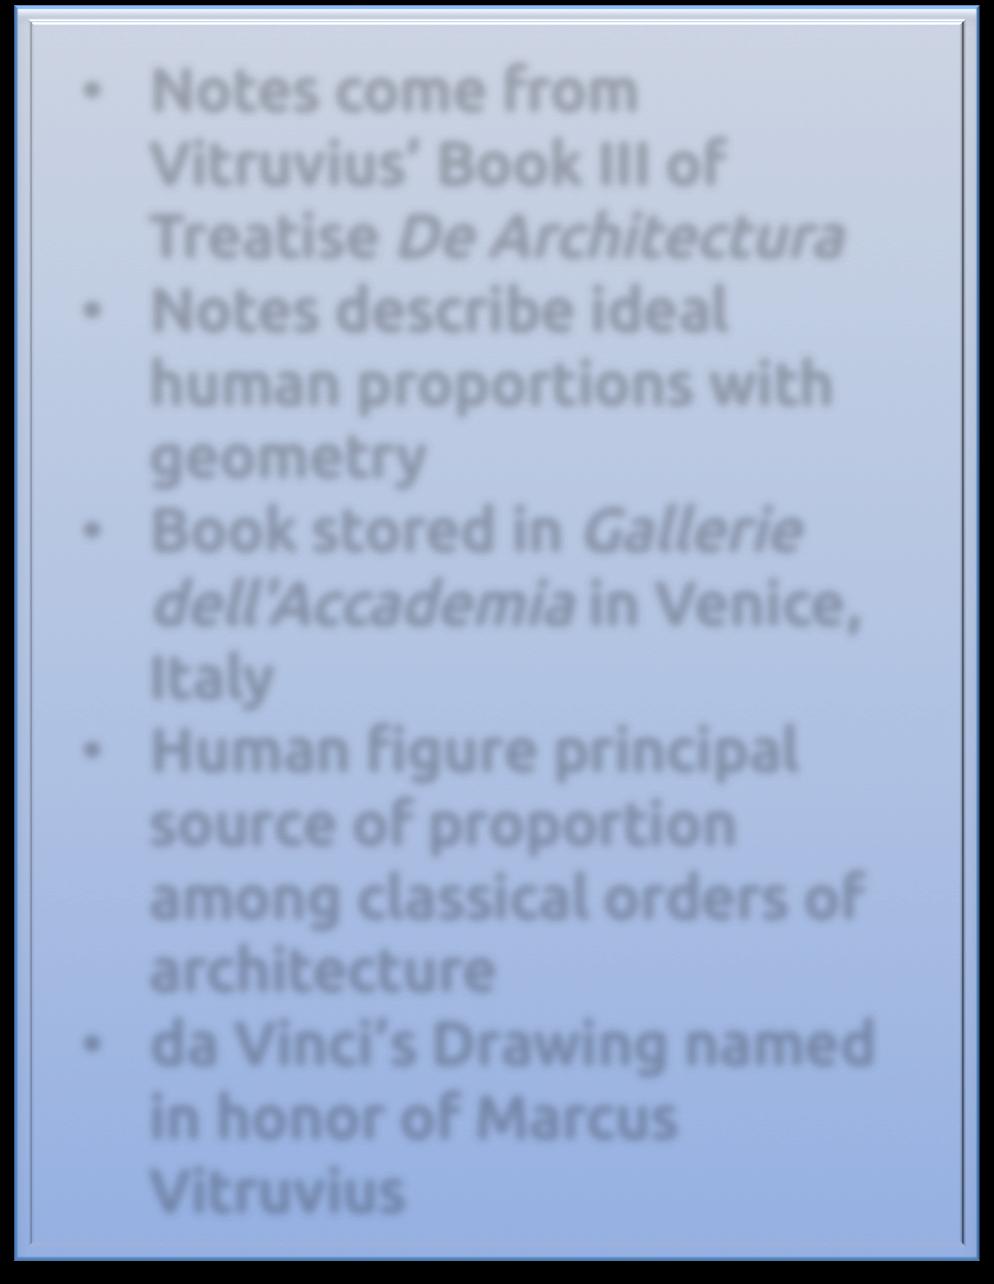 The Vitruvian Man Notes Notes come from Vitruvius Book III of